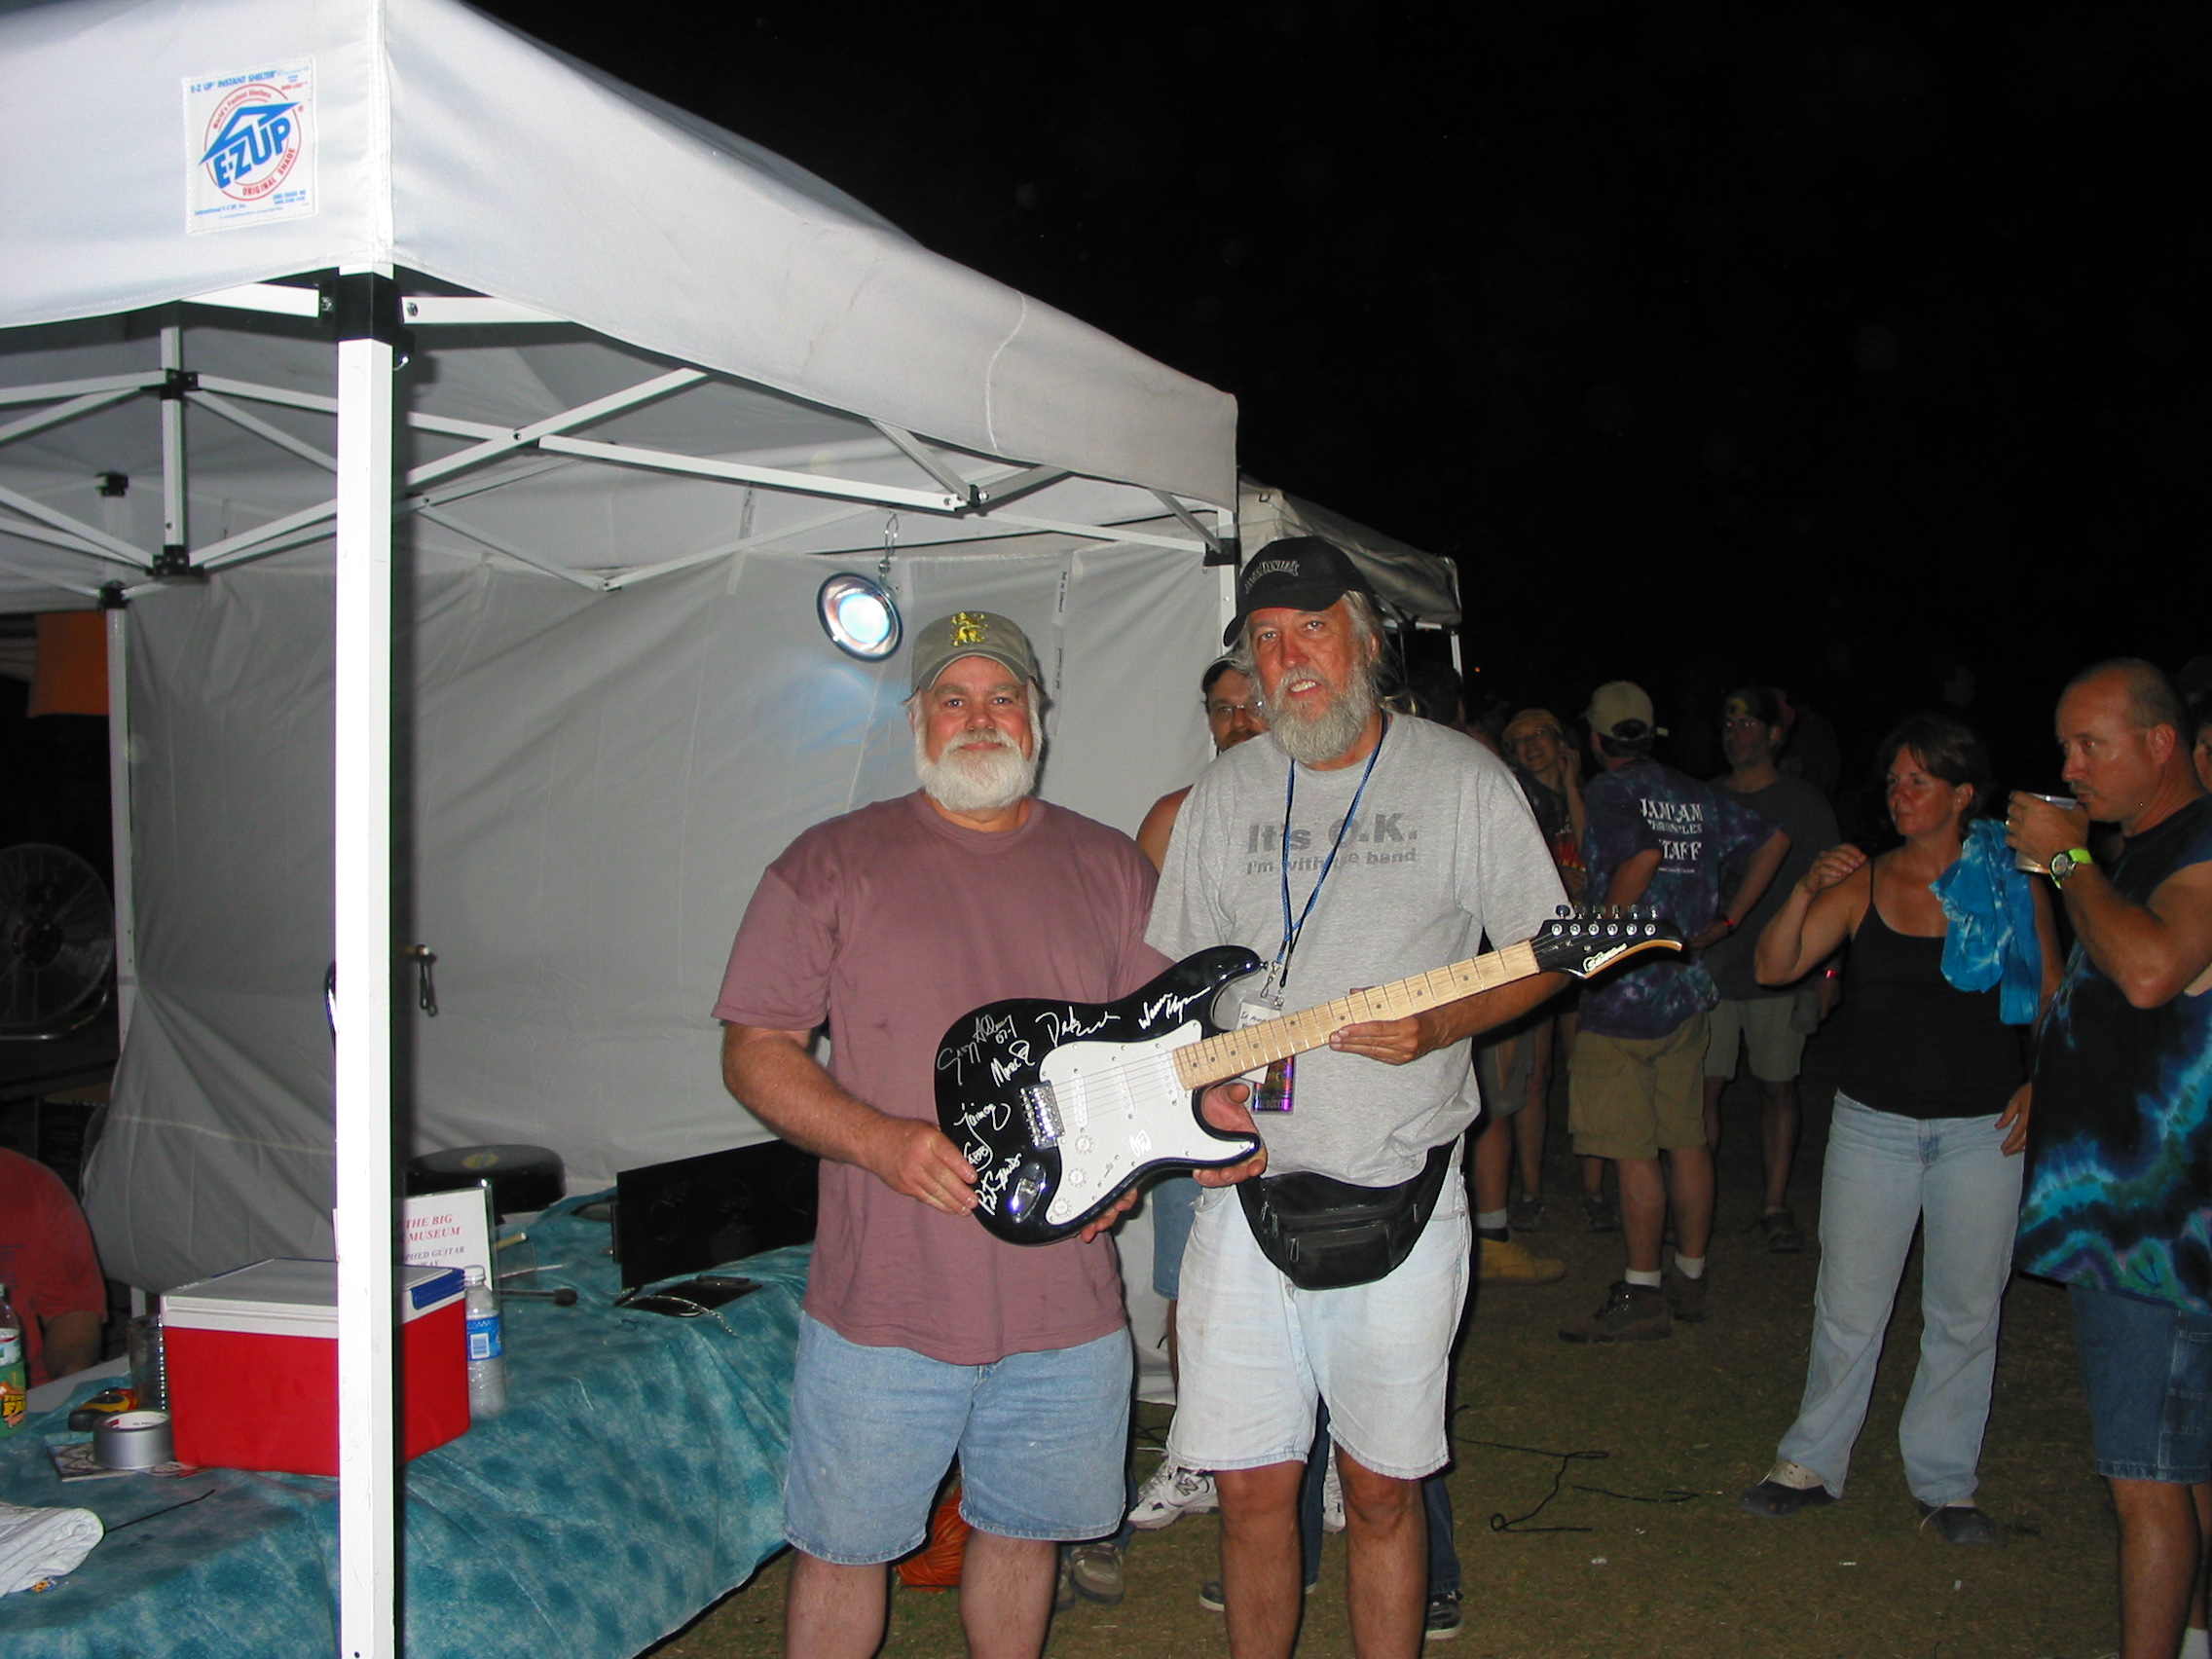 I was at the 2007 Wanee Festival and bought a raffle ticket for this signed ABB Guitar the afternoon of the drawing and WON. I happened to be walking by when they selected the winning ticket 9:05 PM April 14, 2007 and to my surprise announced my name.